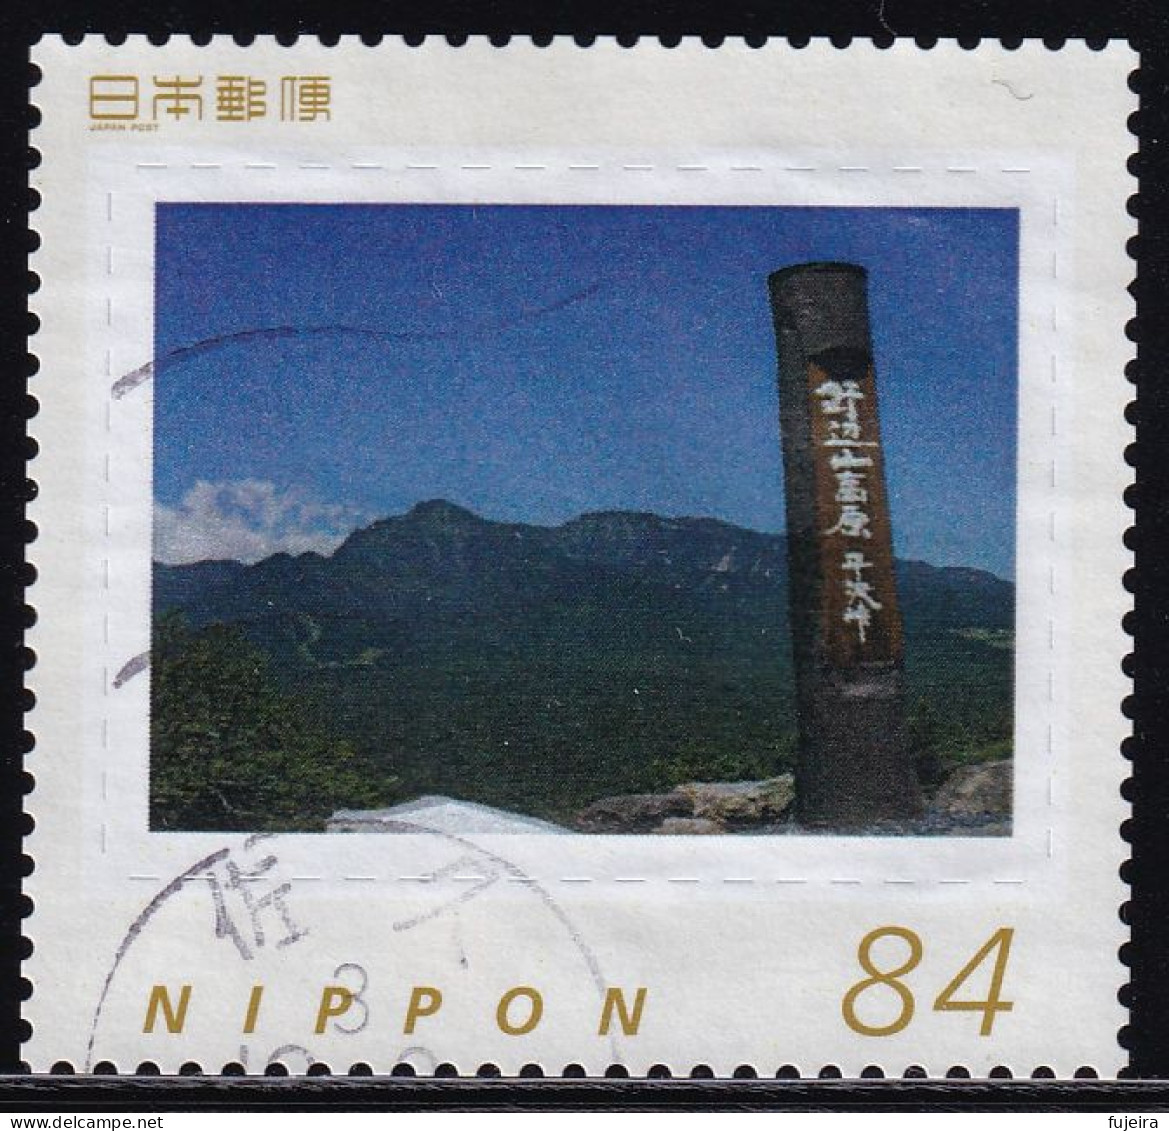 Japan Personalized Stamp, Nobeyama Highland (jpw0048) Used - Used Stamps